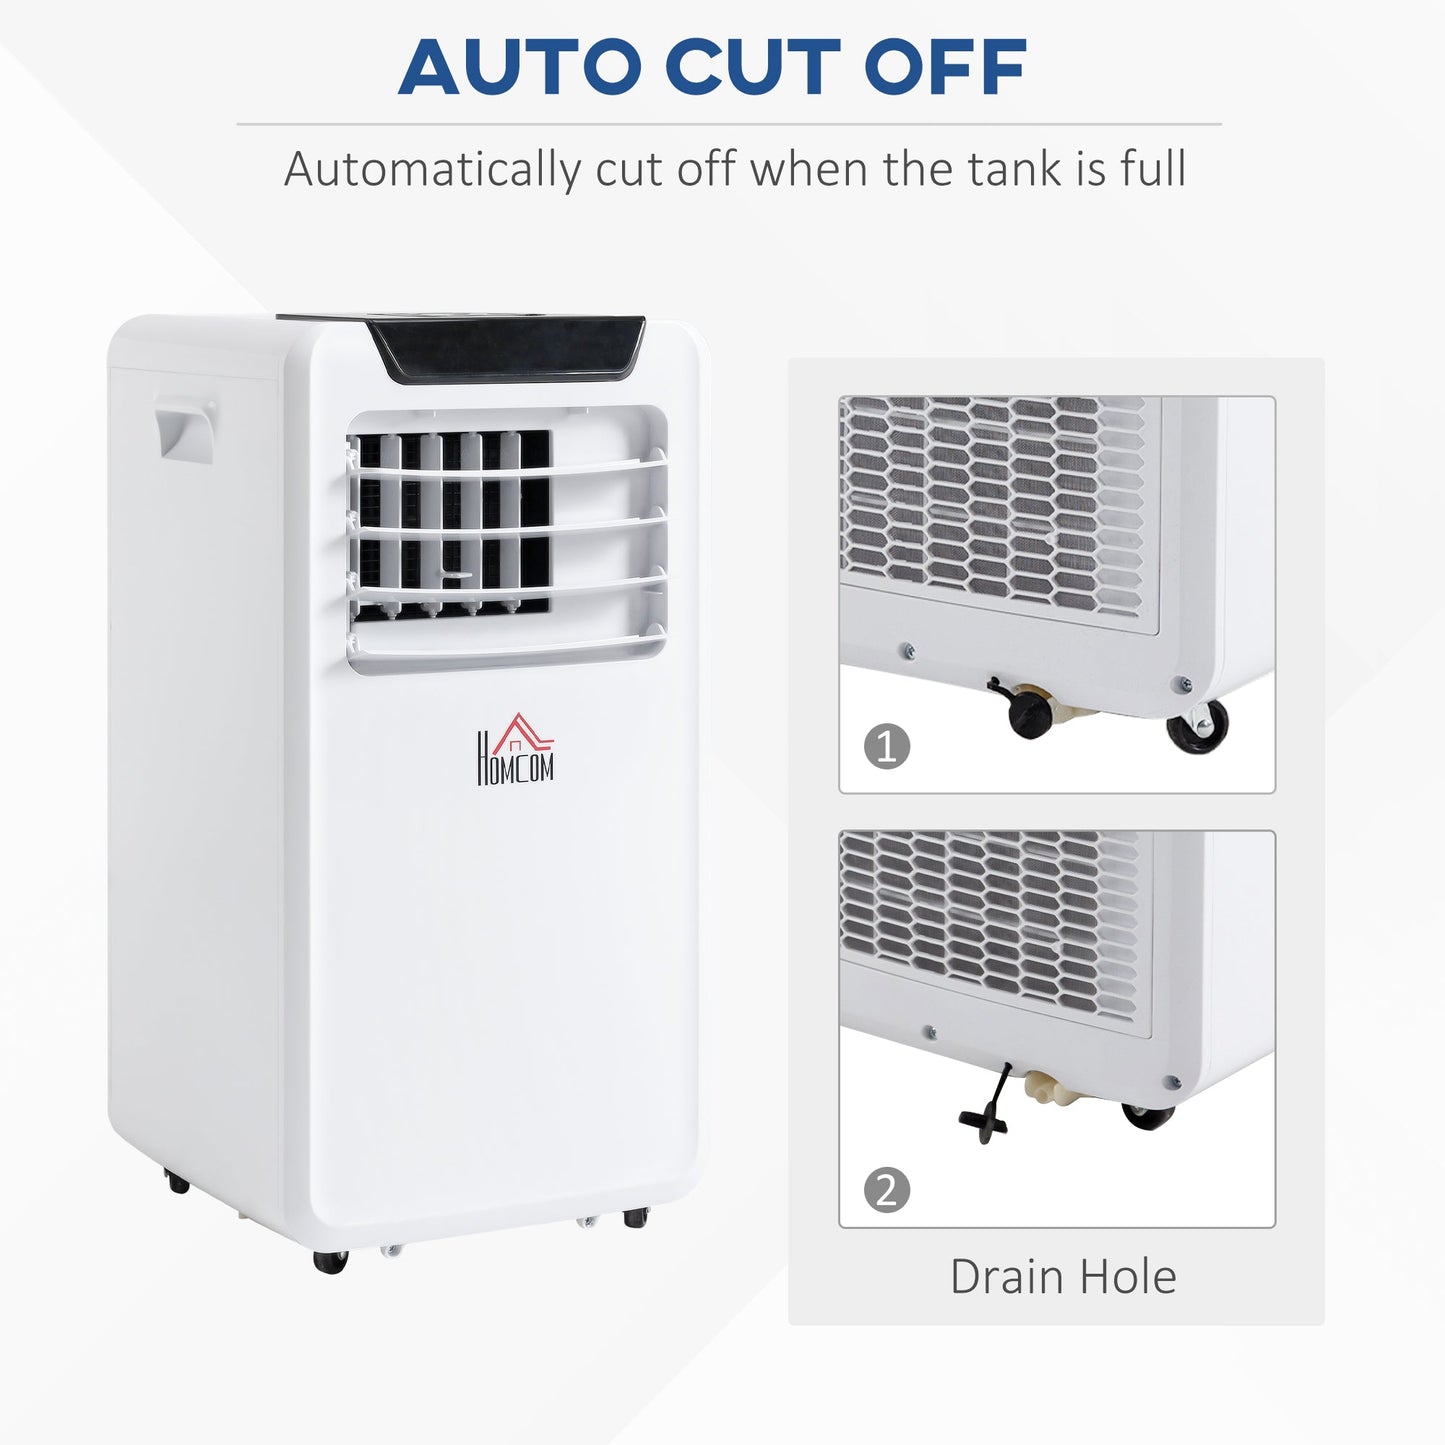 10000BTU Portable Air Conditioner, Cooling Dehumidifying Ventilating with Remote Control & LED Display - White